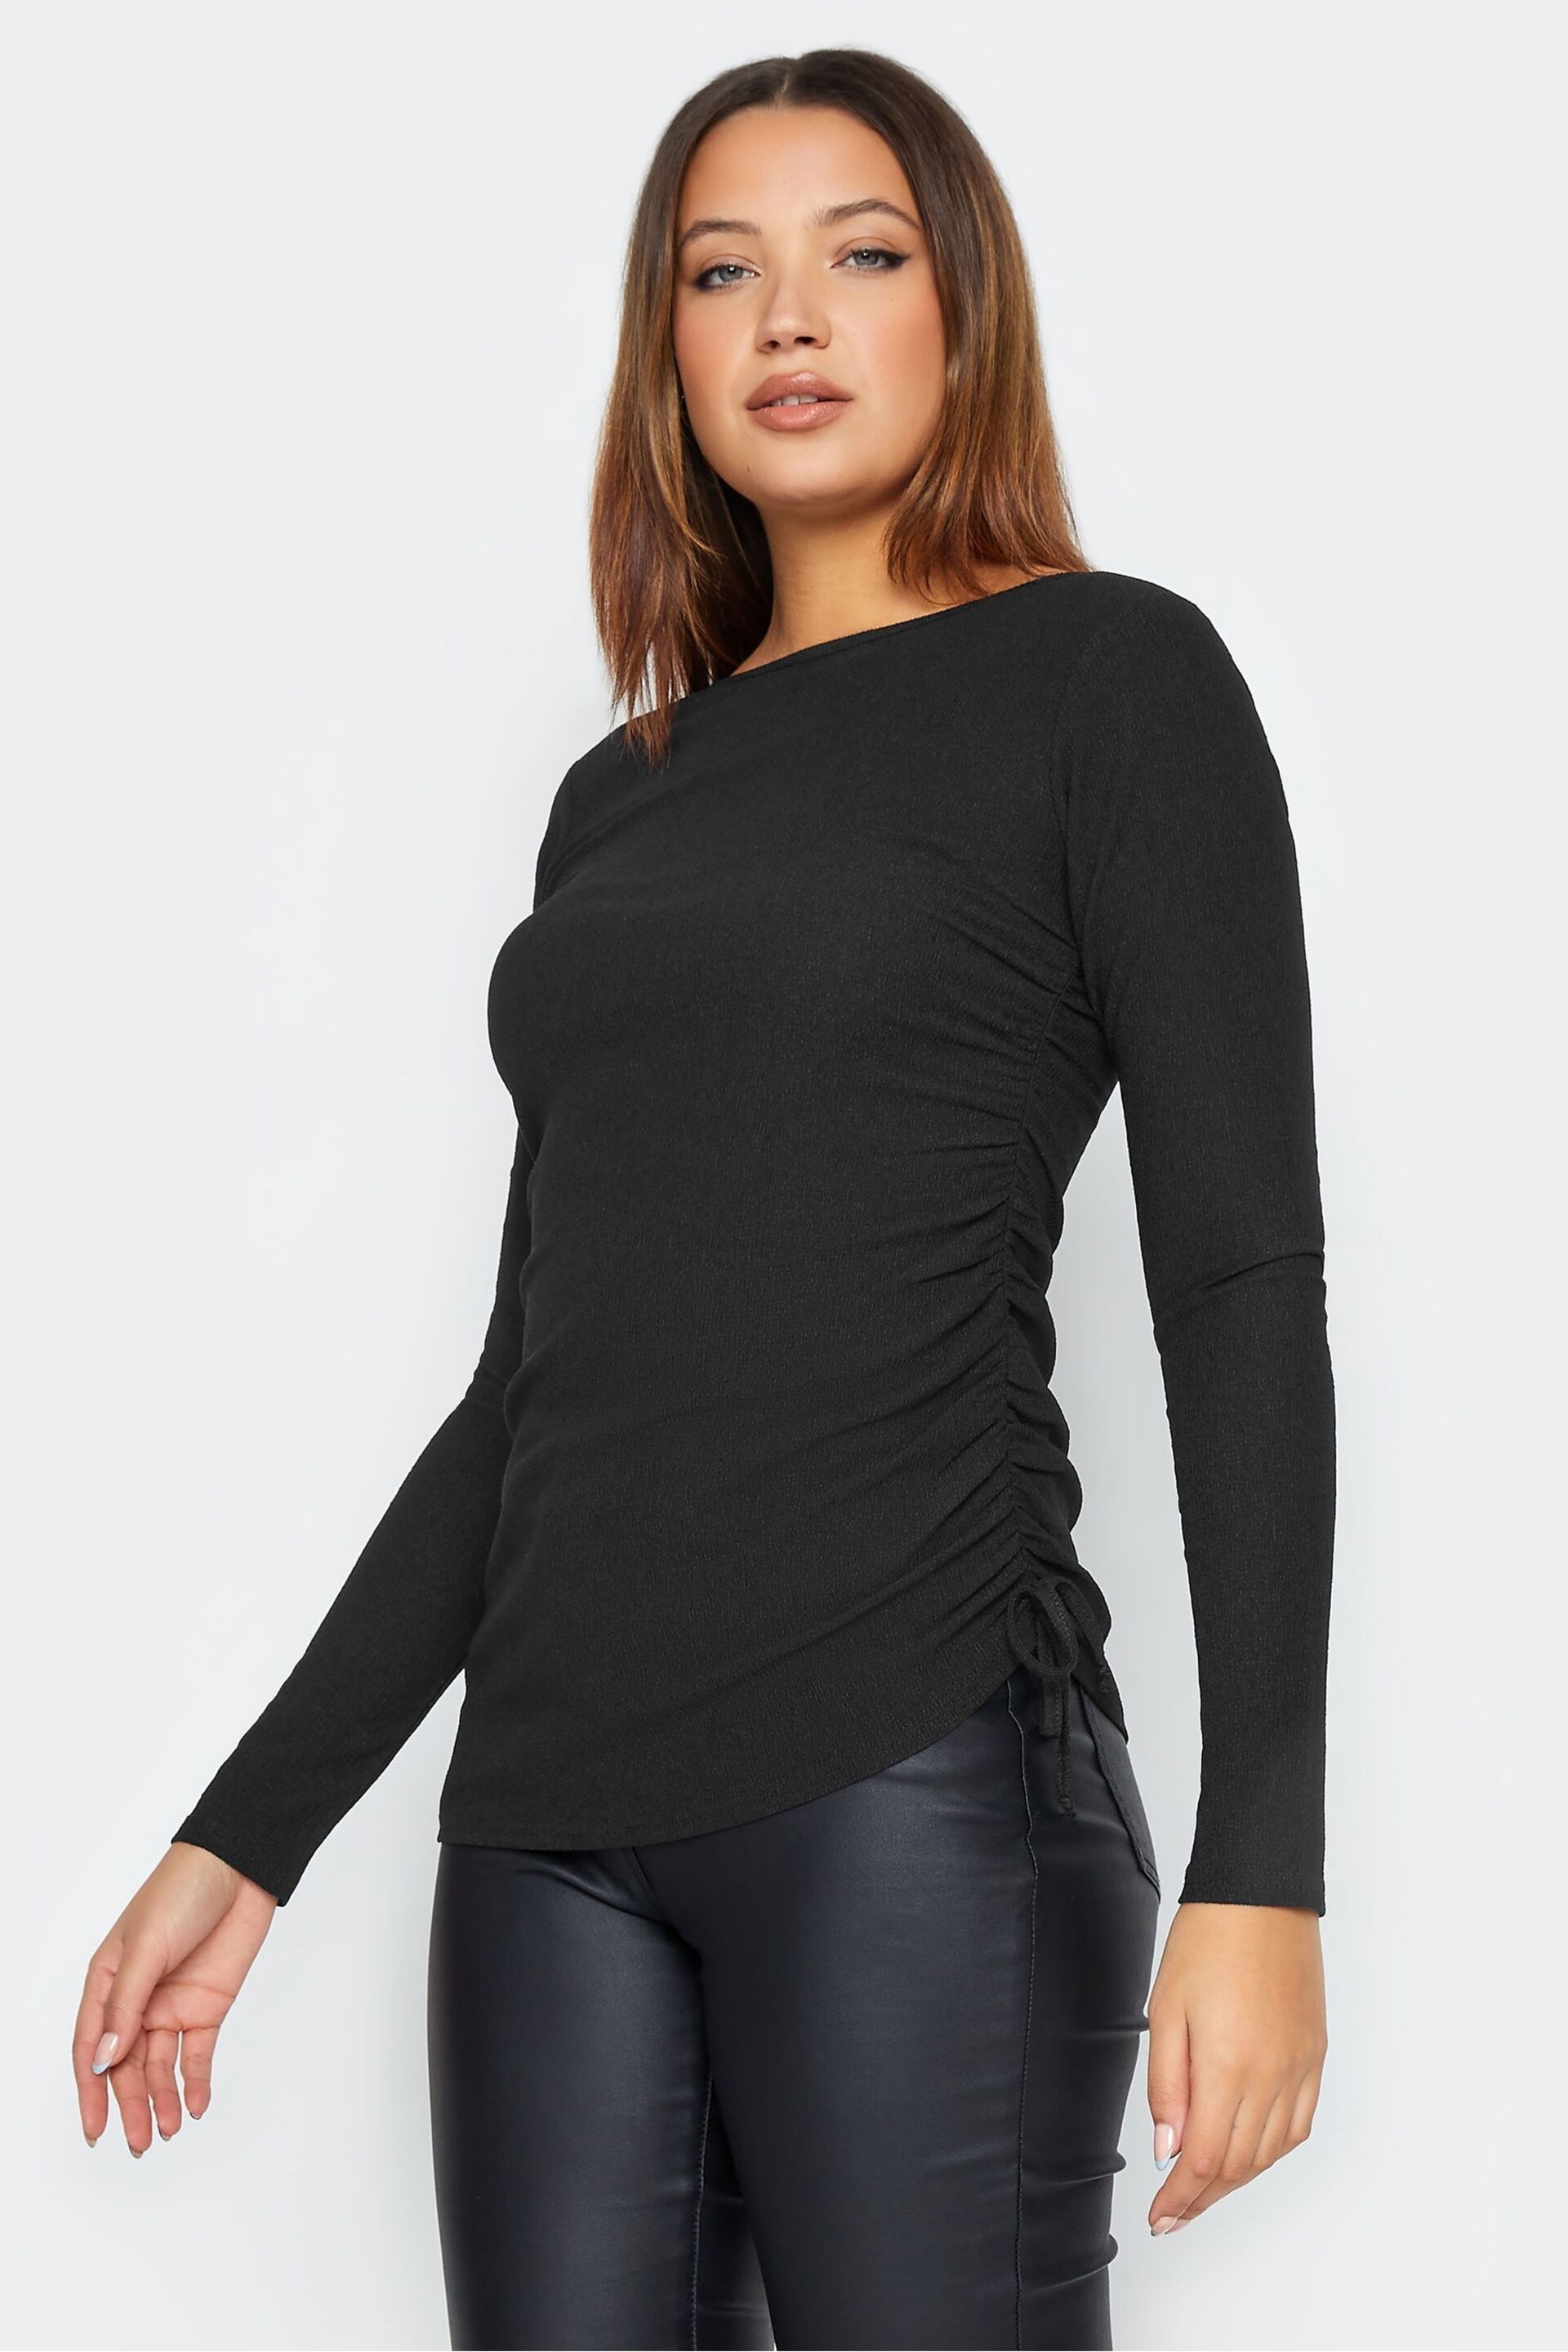 Long Tall Sally Black Textured Ruched Side Top - Image 1 of 4